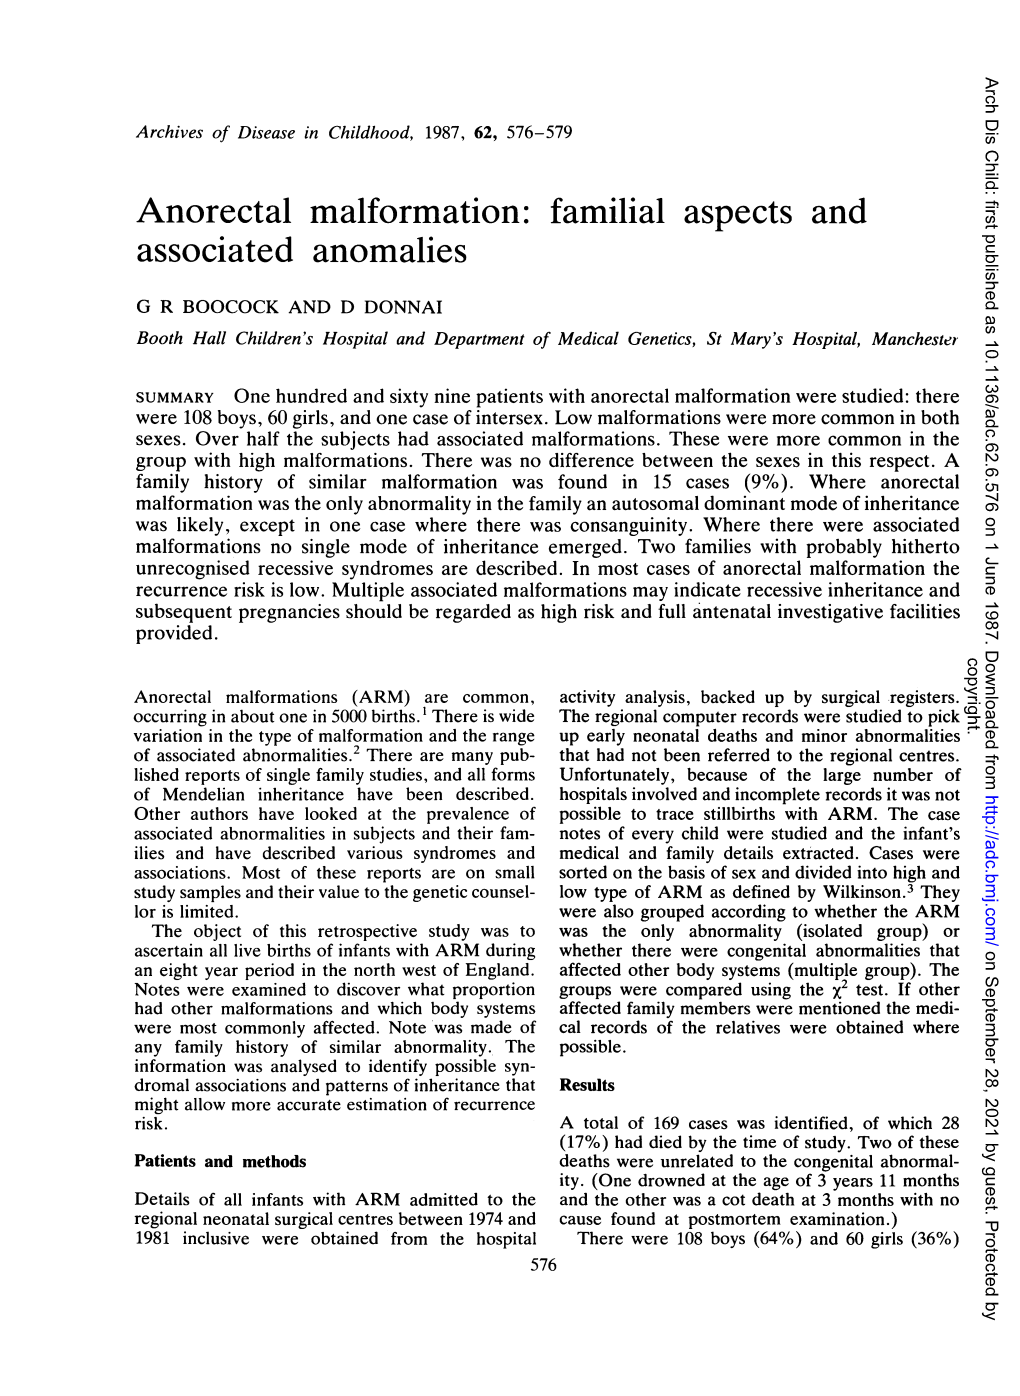 Anorectal Malformation: Familial Aspects and Associated Anomalies